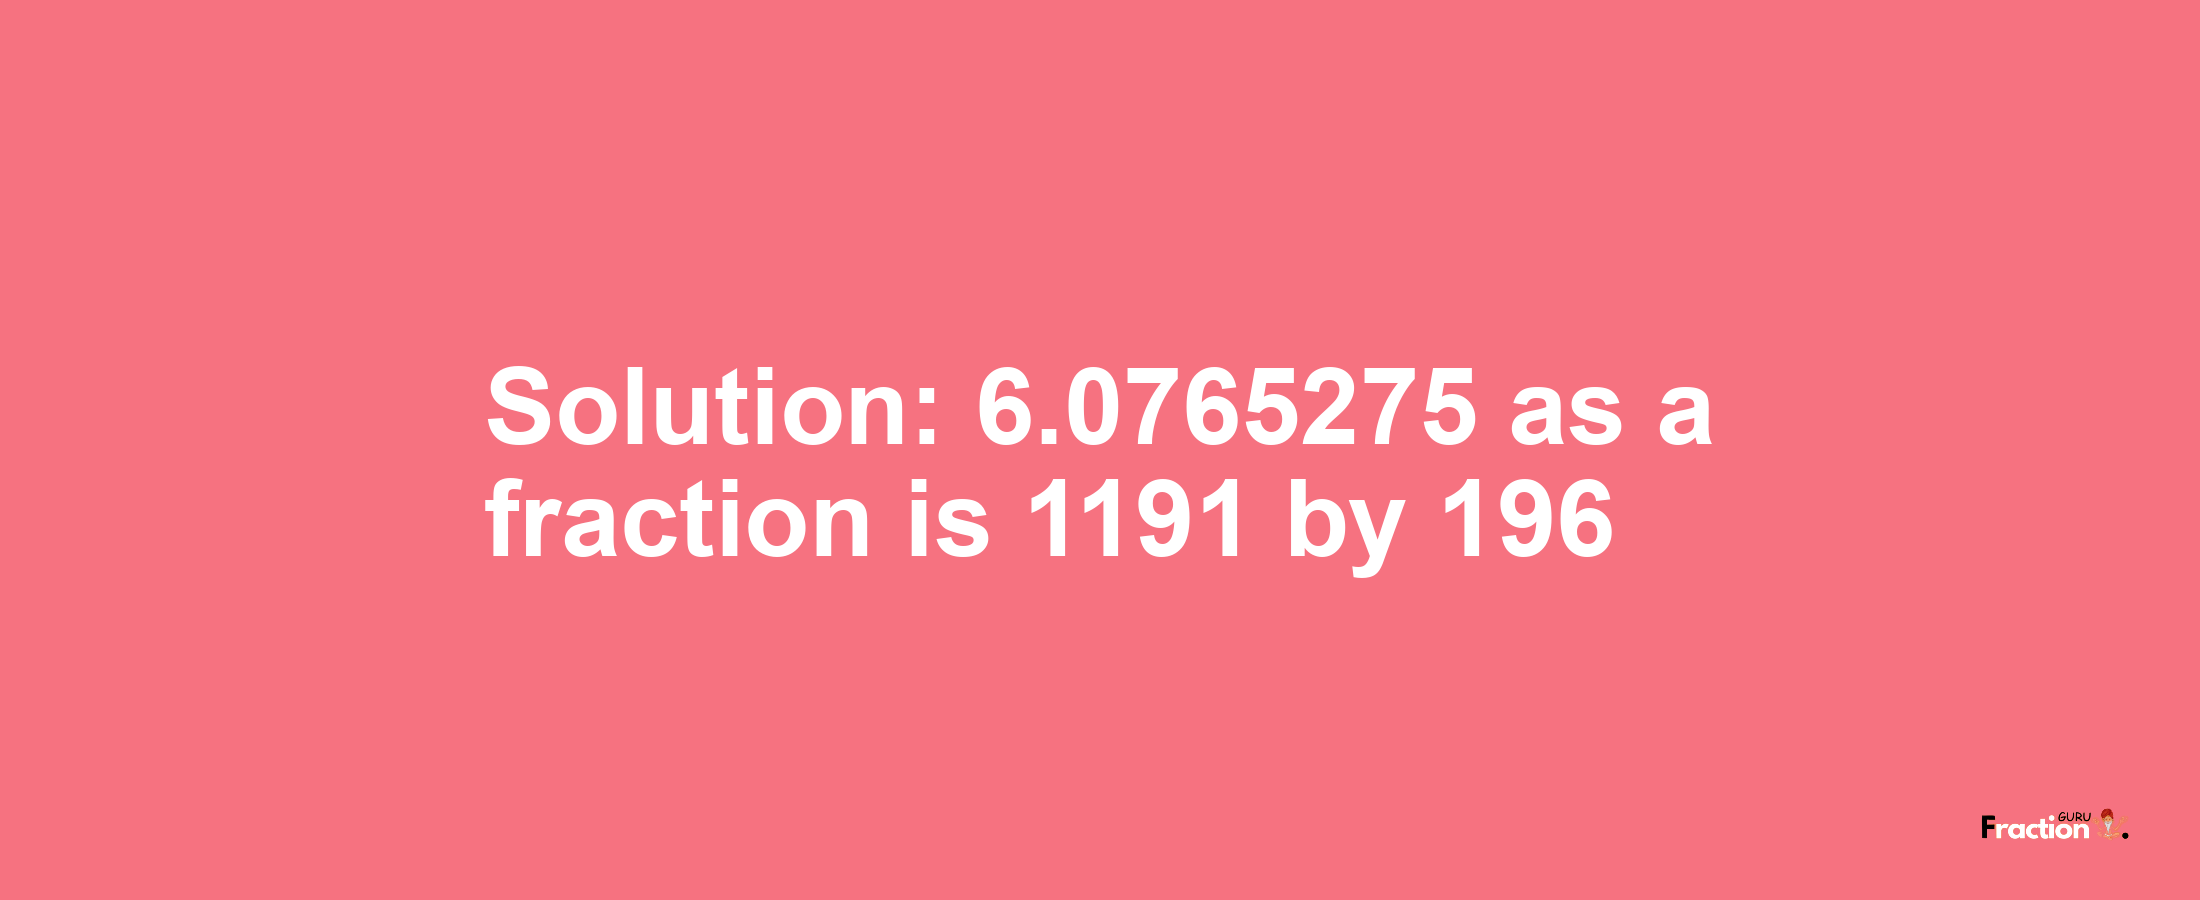 Solution:6.0765275 as a fraction is 1191/196